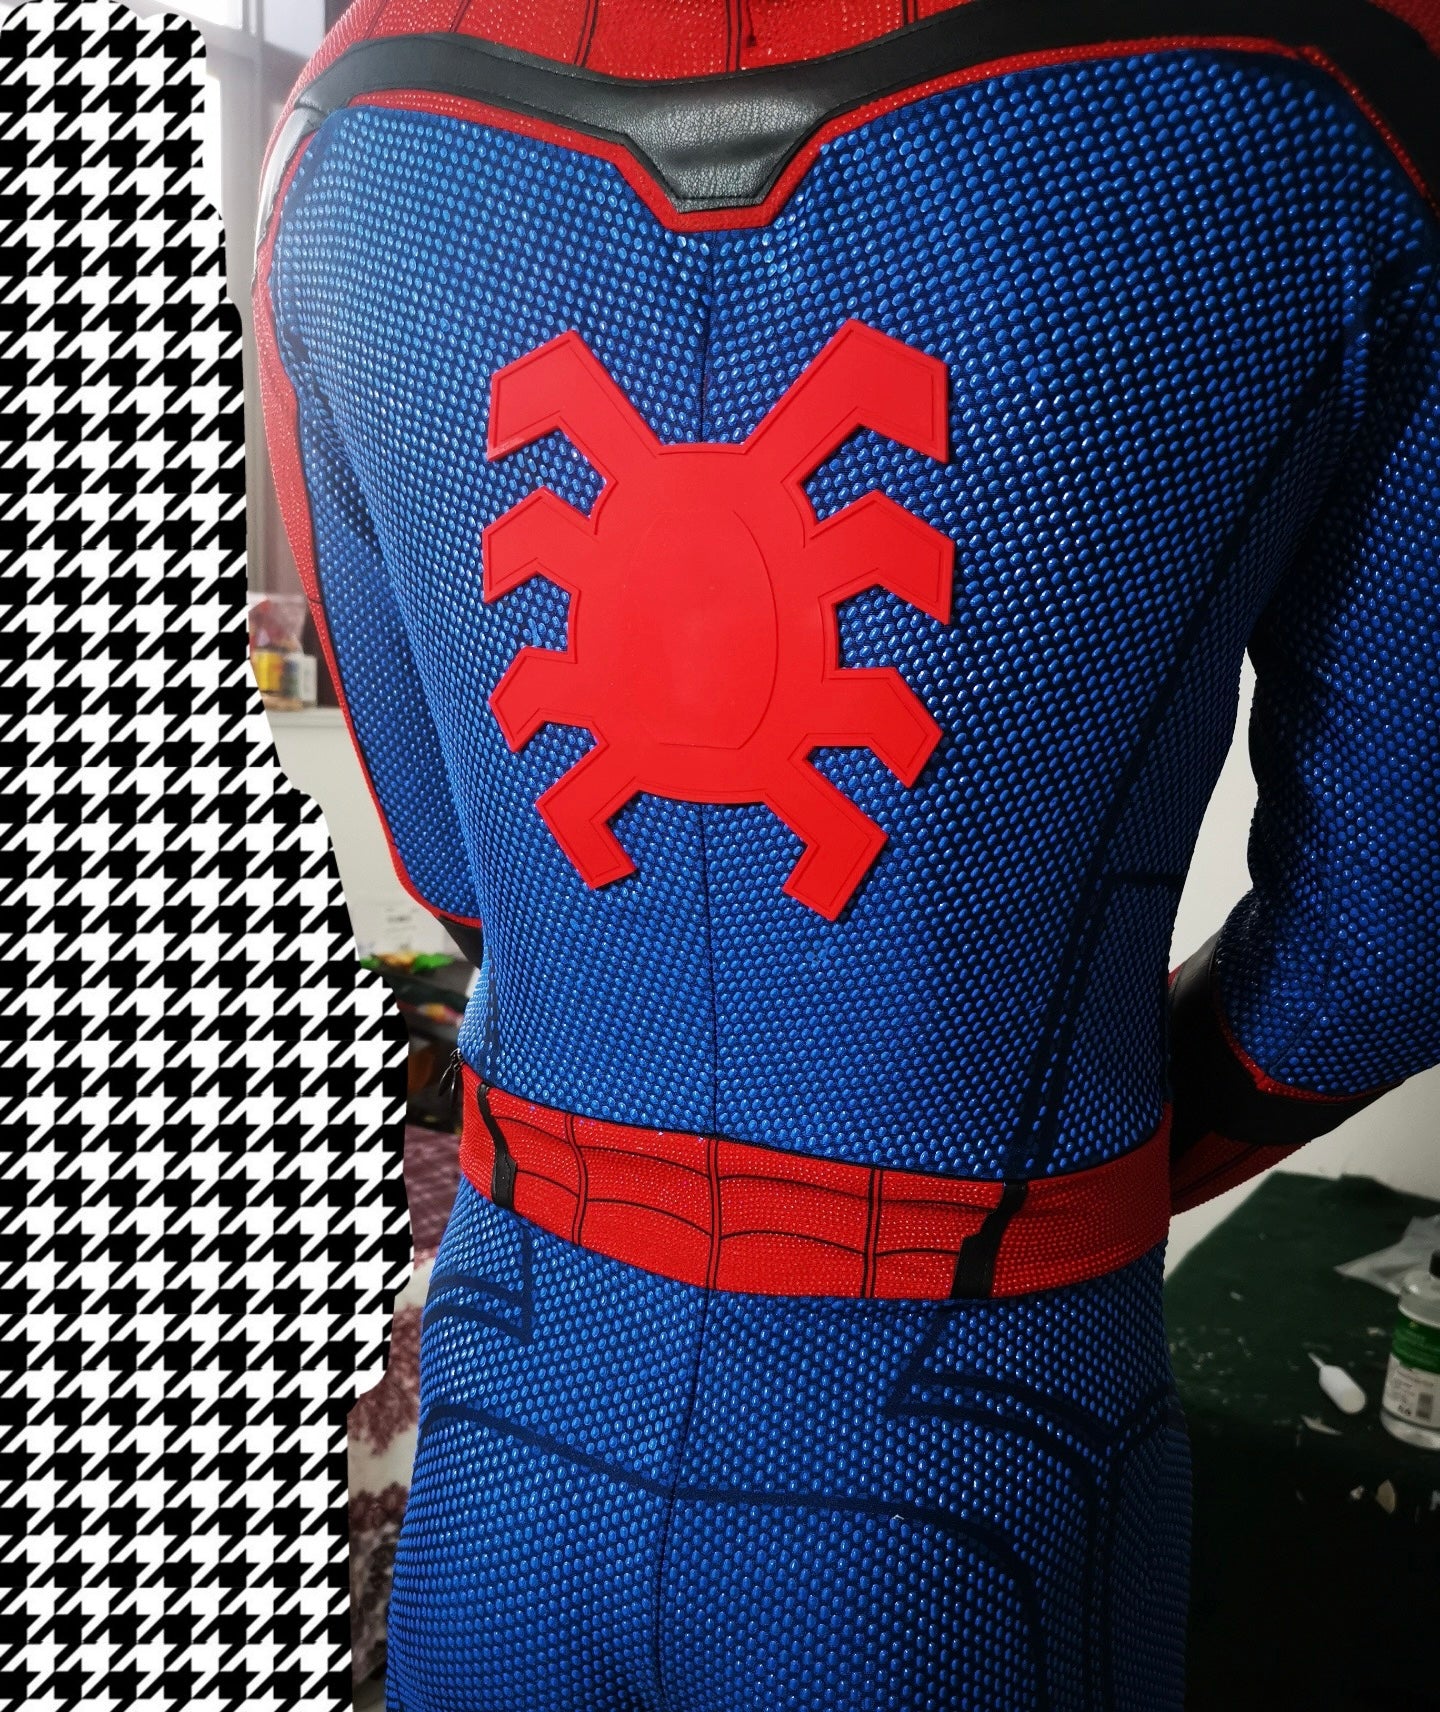 TOM HOLLAND Suit homecoming version with Face shell & 3D Rubber Web Movie Prop Replica(wearable)